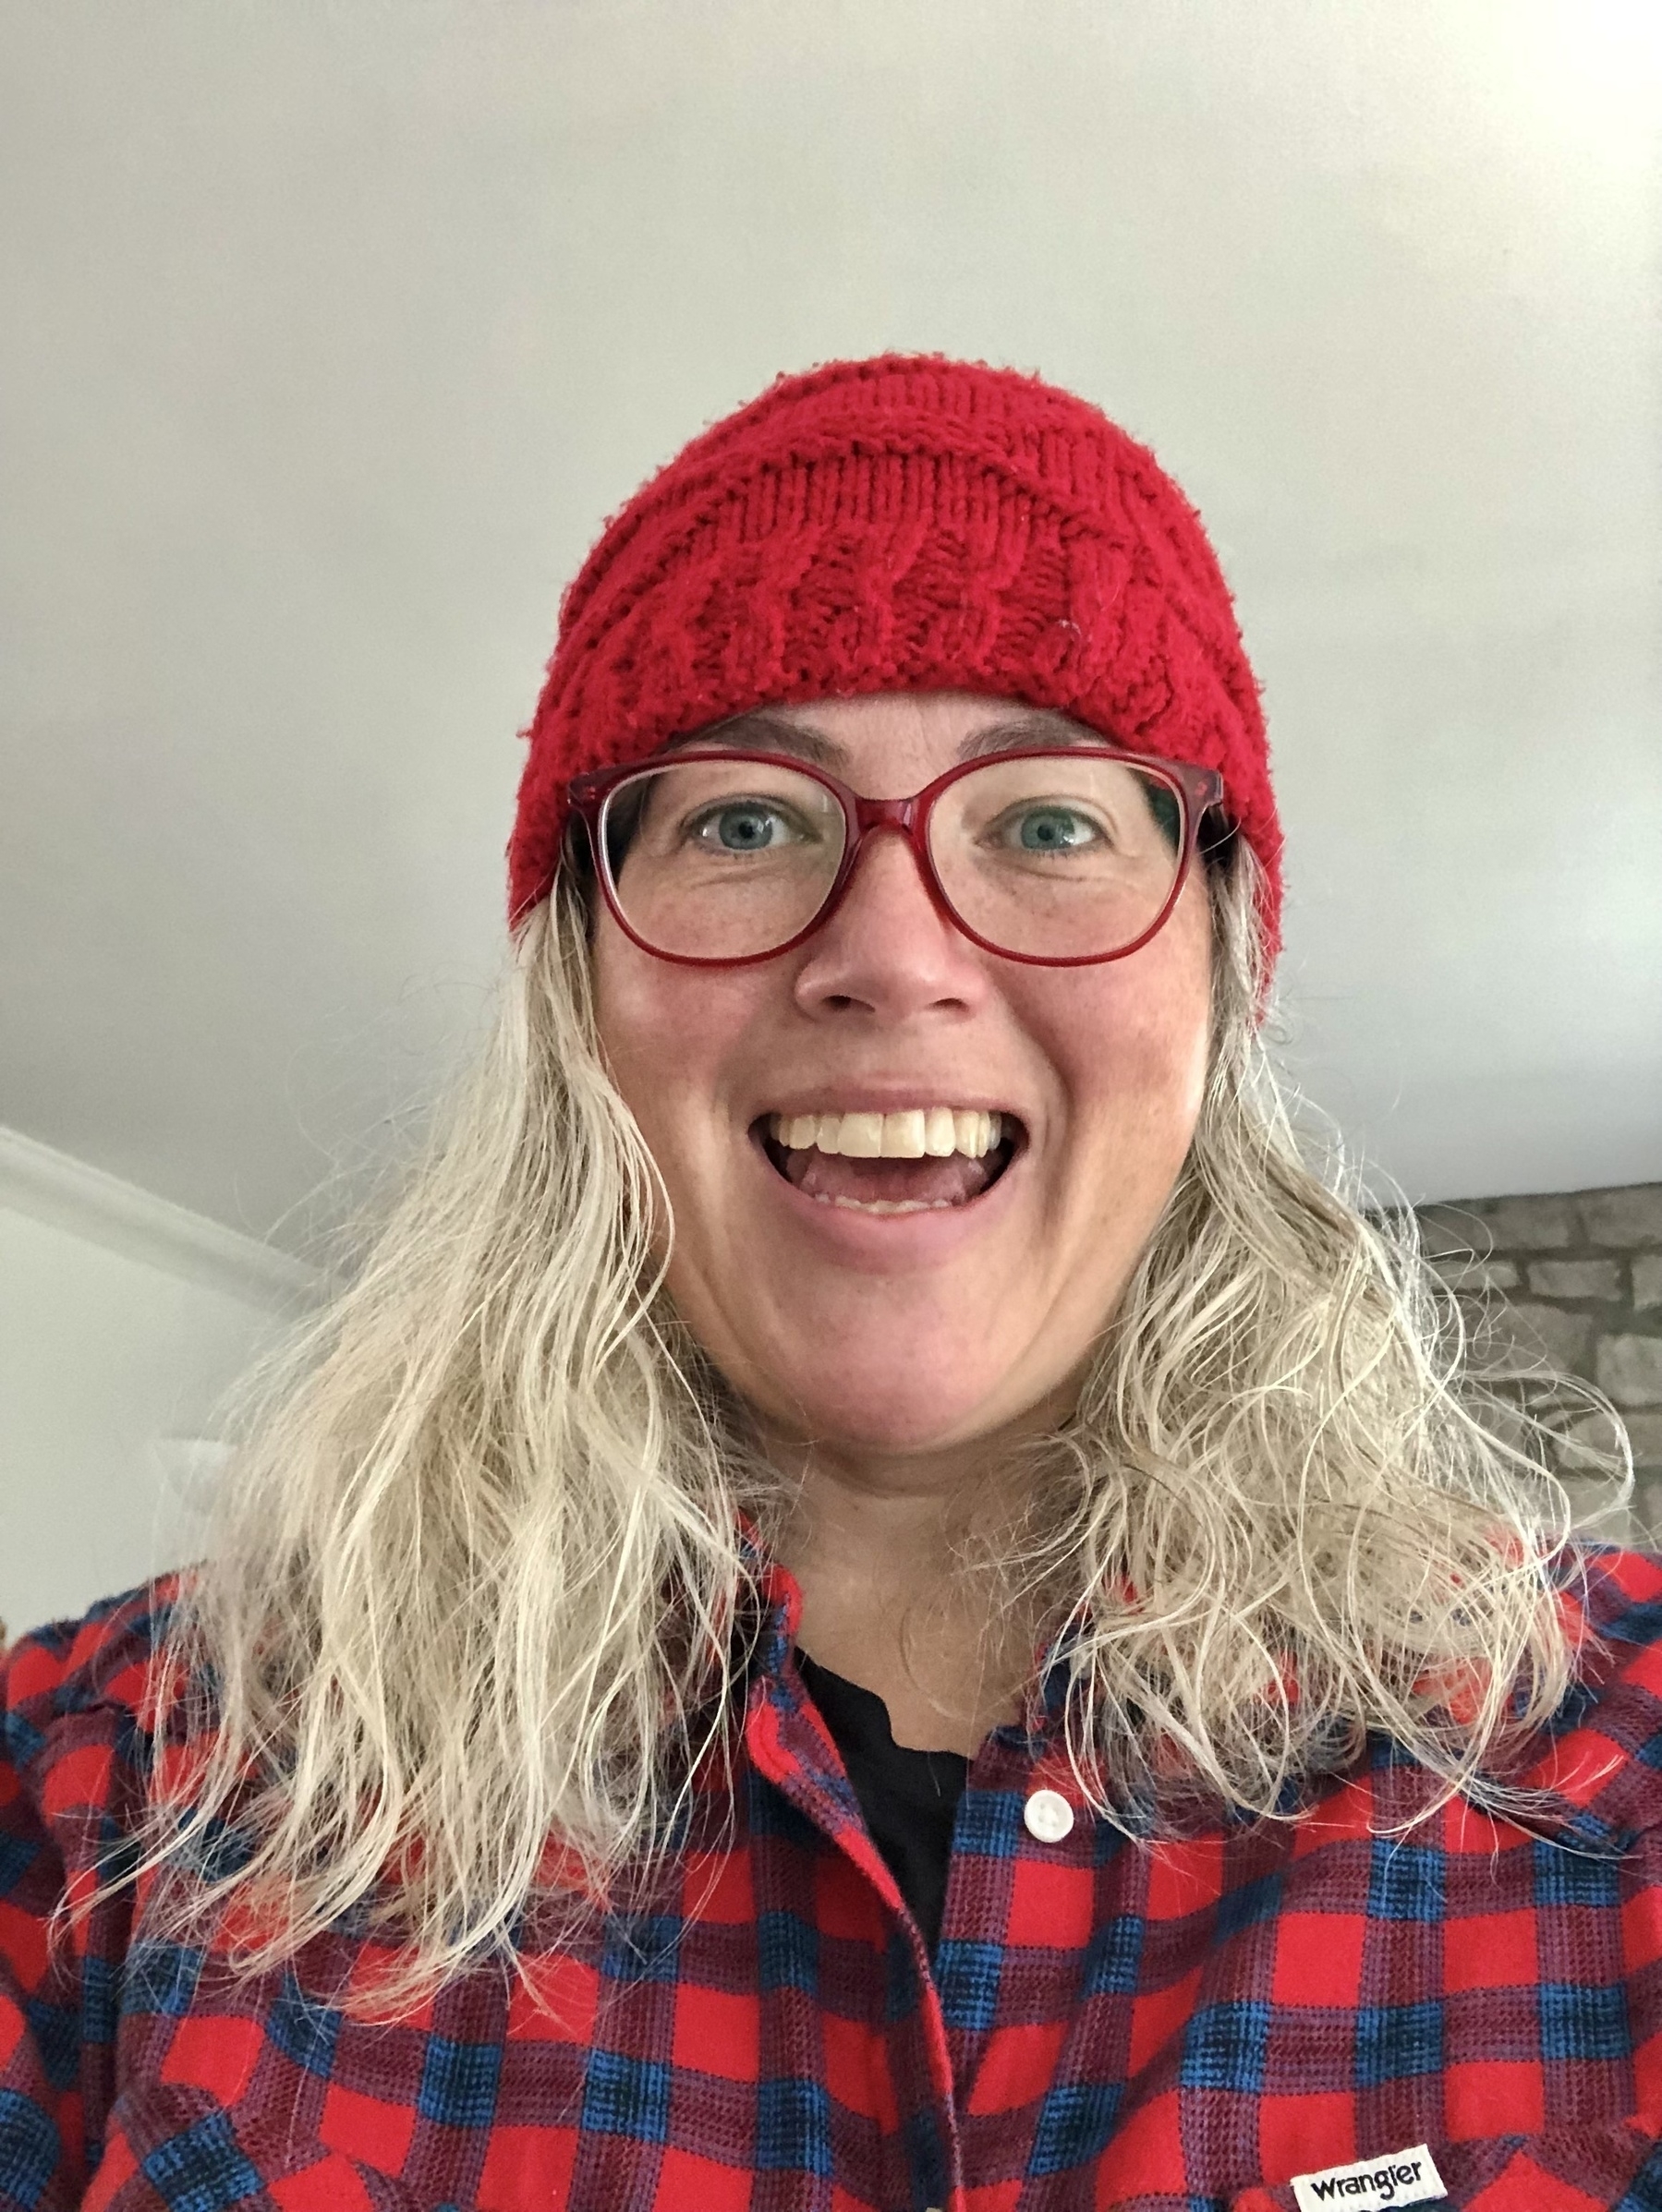 woman with red bobble hat and glasses on gasping at camera in surprised disbelief